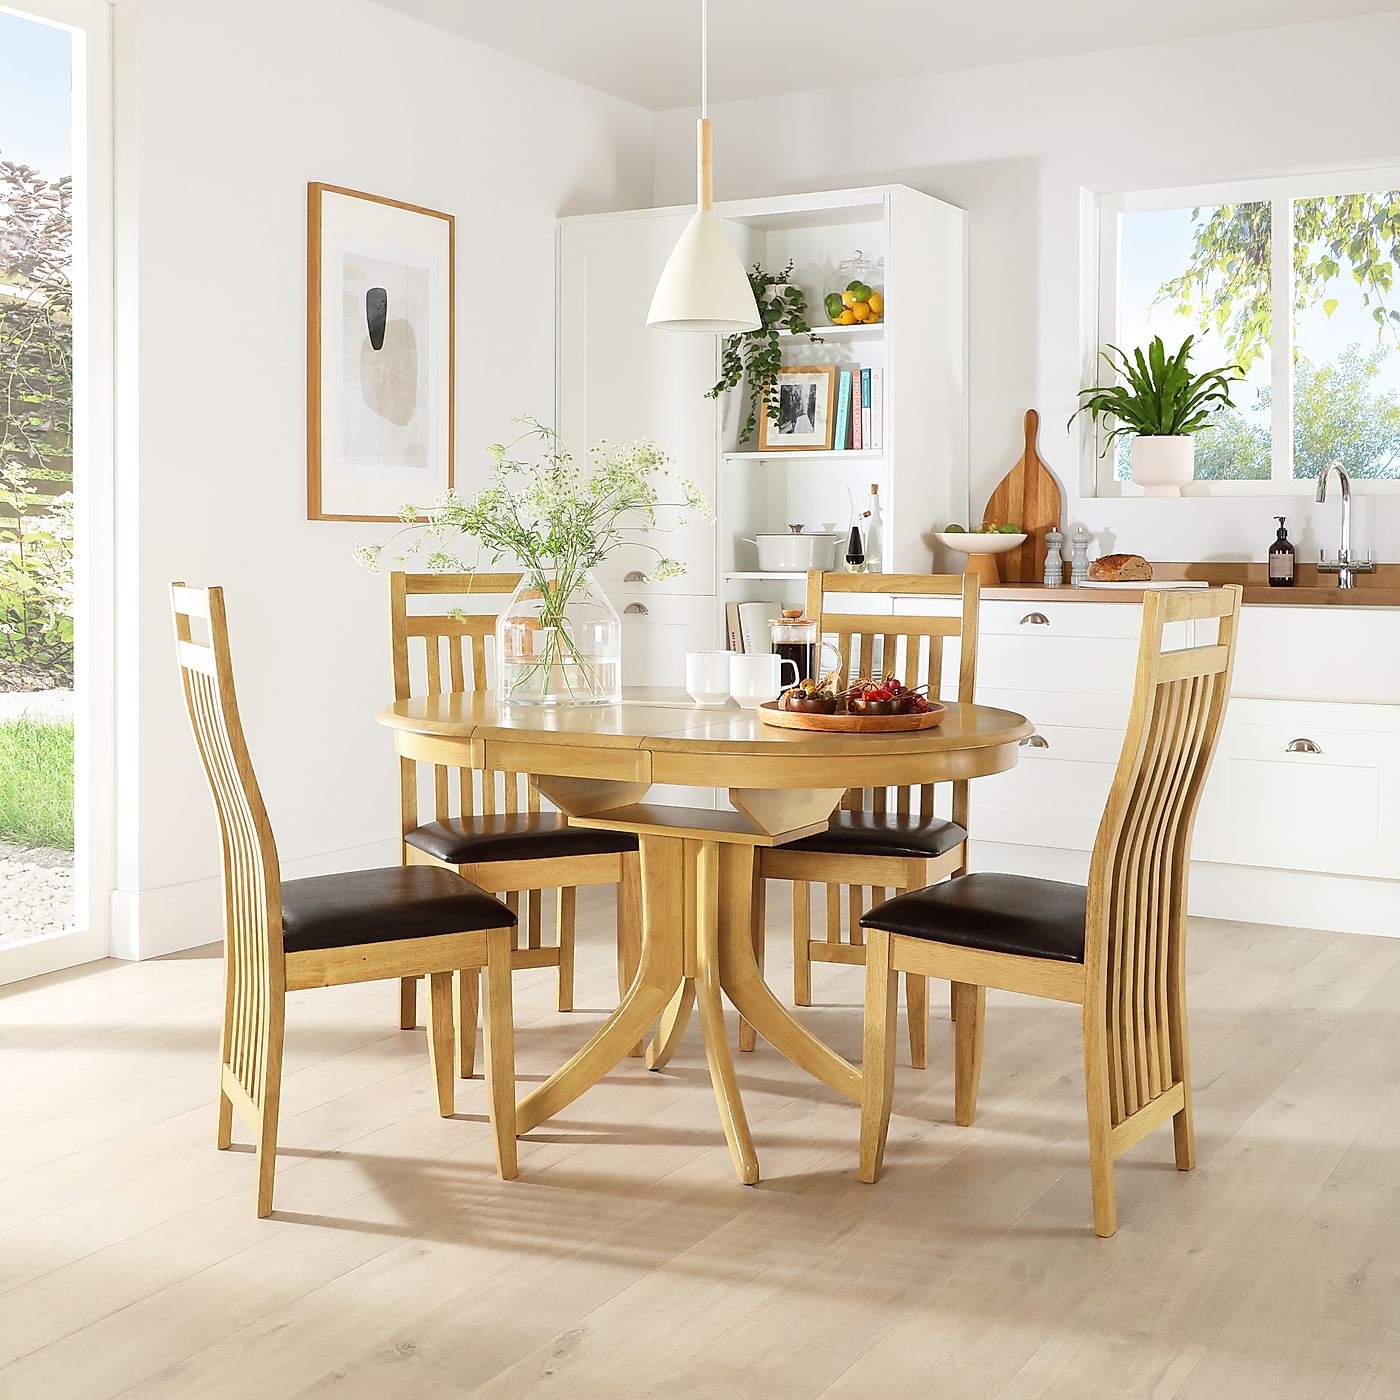 Hudson Round Oak Extending Dining Table with 6 Bali Chairs (Brown